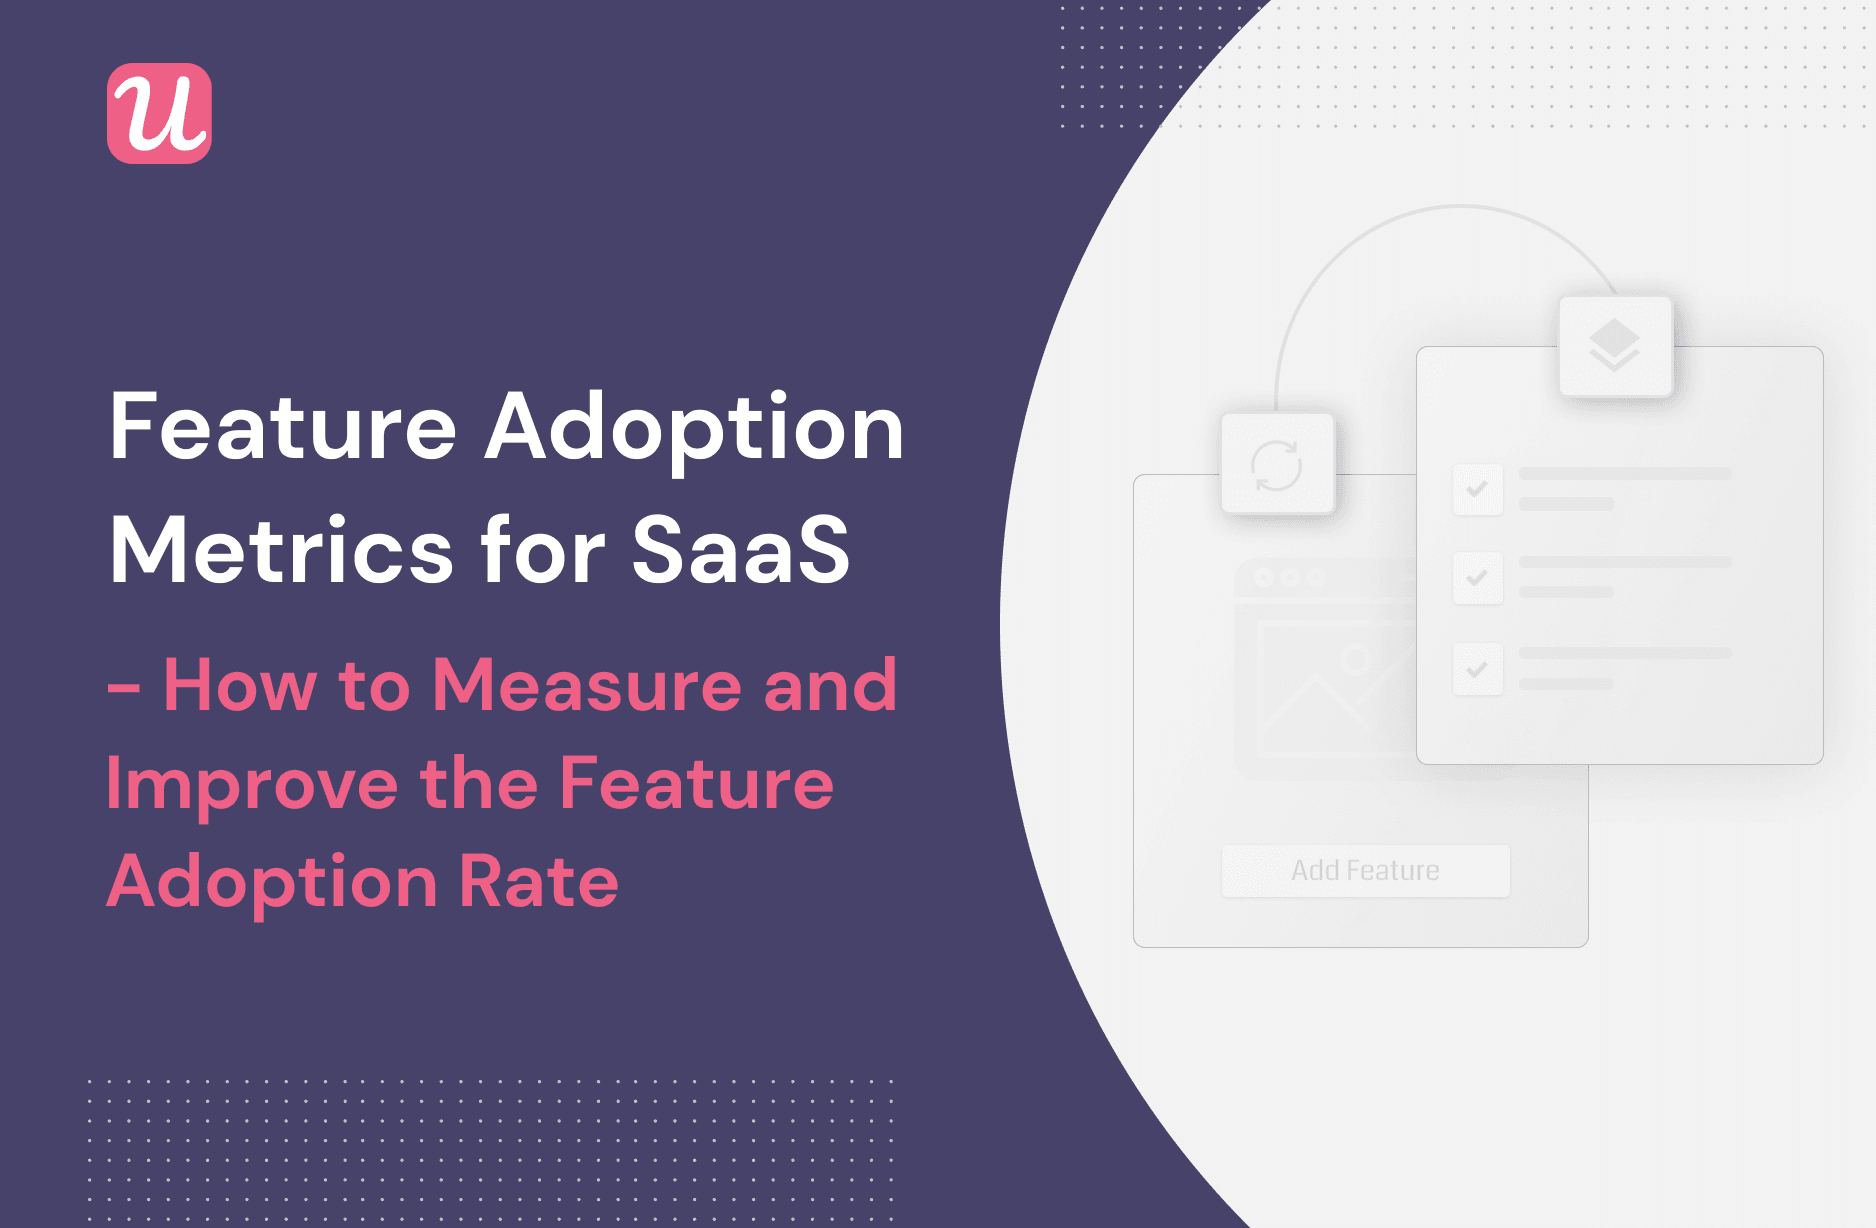 Feature adoption metrics for SaaS - How to measure and improve the feature adoption rate